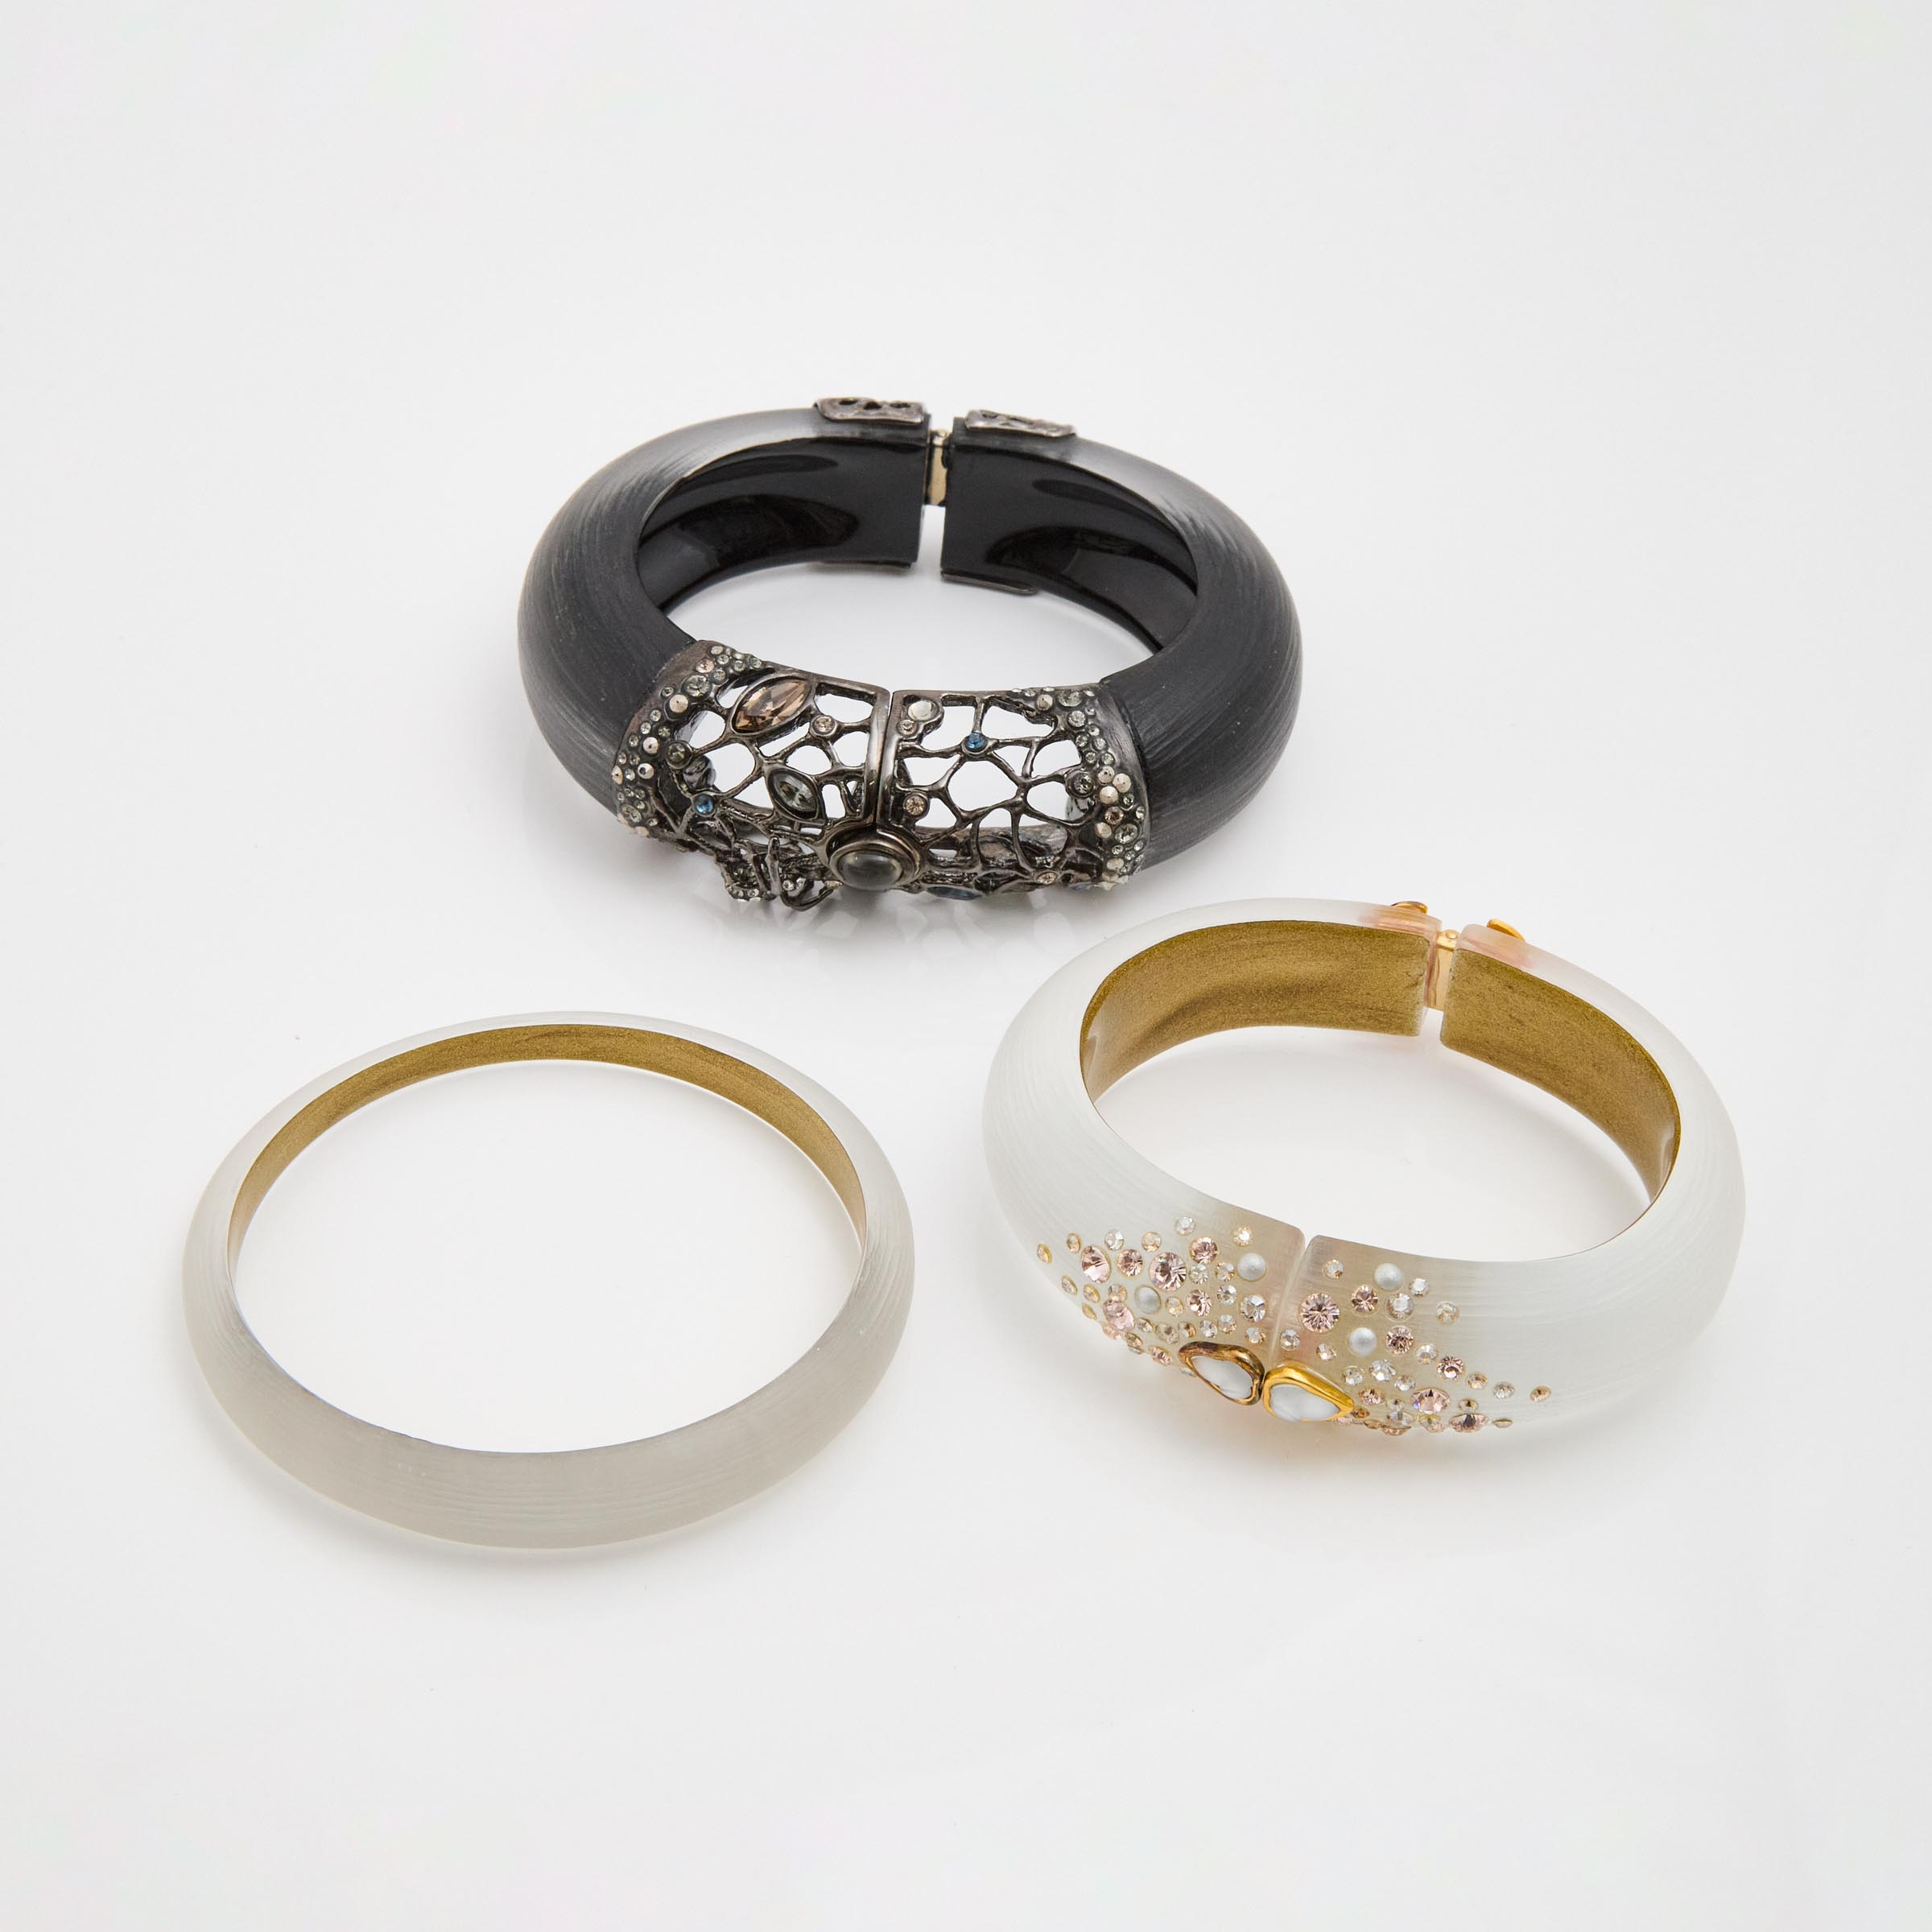 Three Alexis Bittar Carved Lucite, Gold-Tone & Black-Tone Metal Bangles